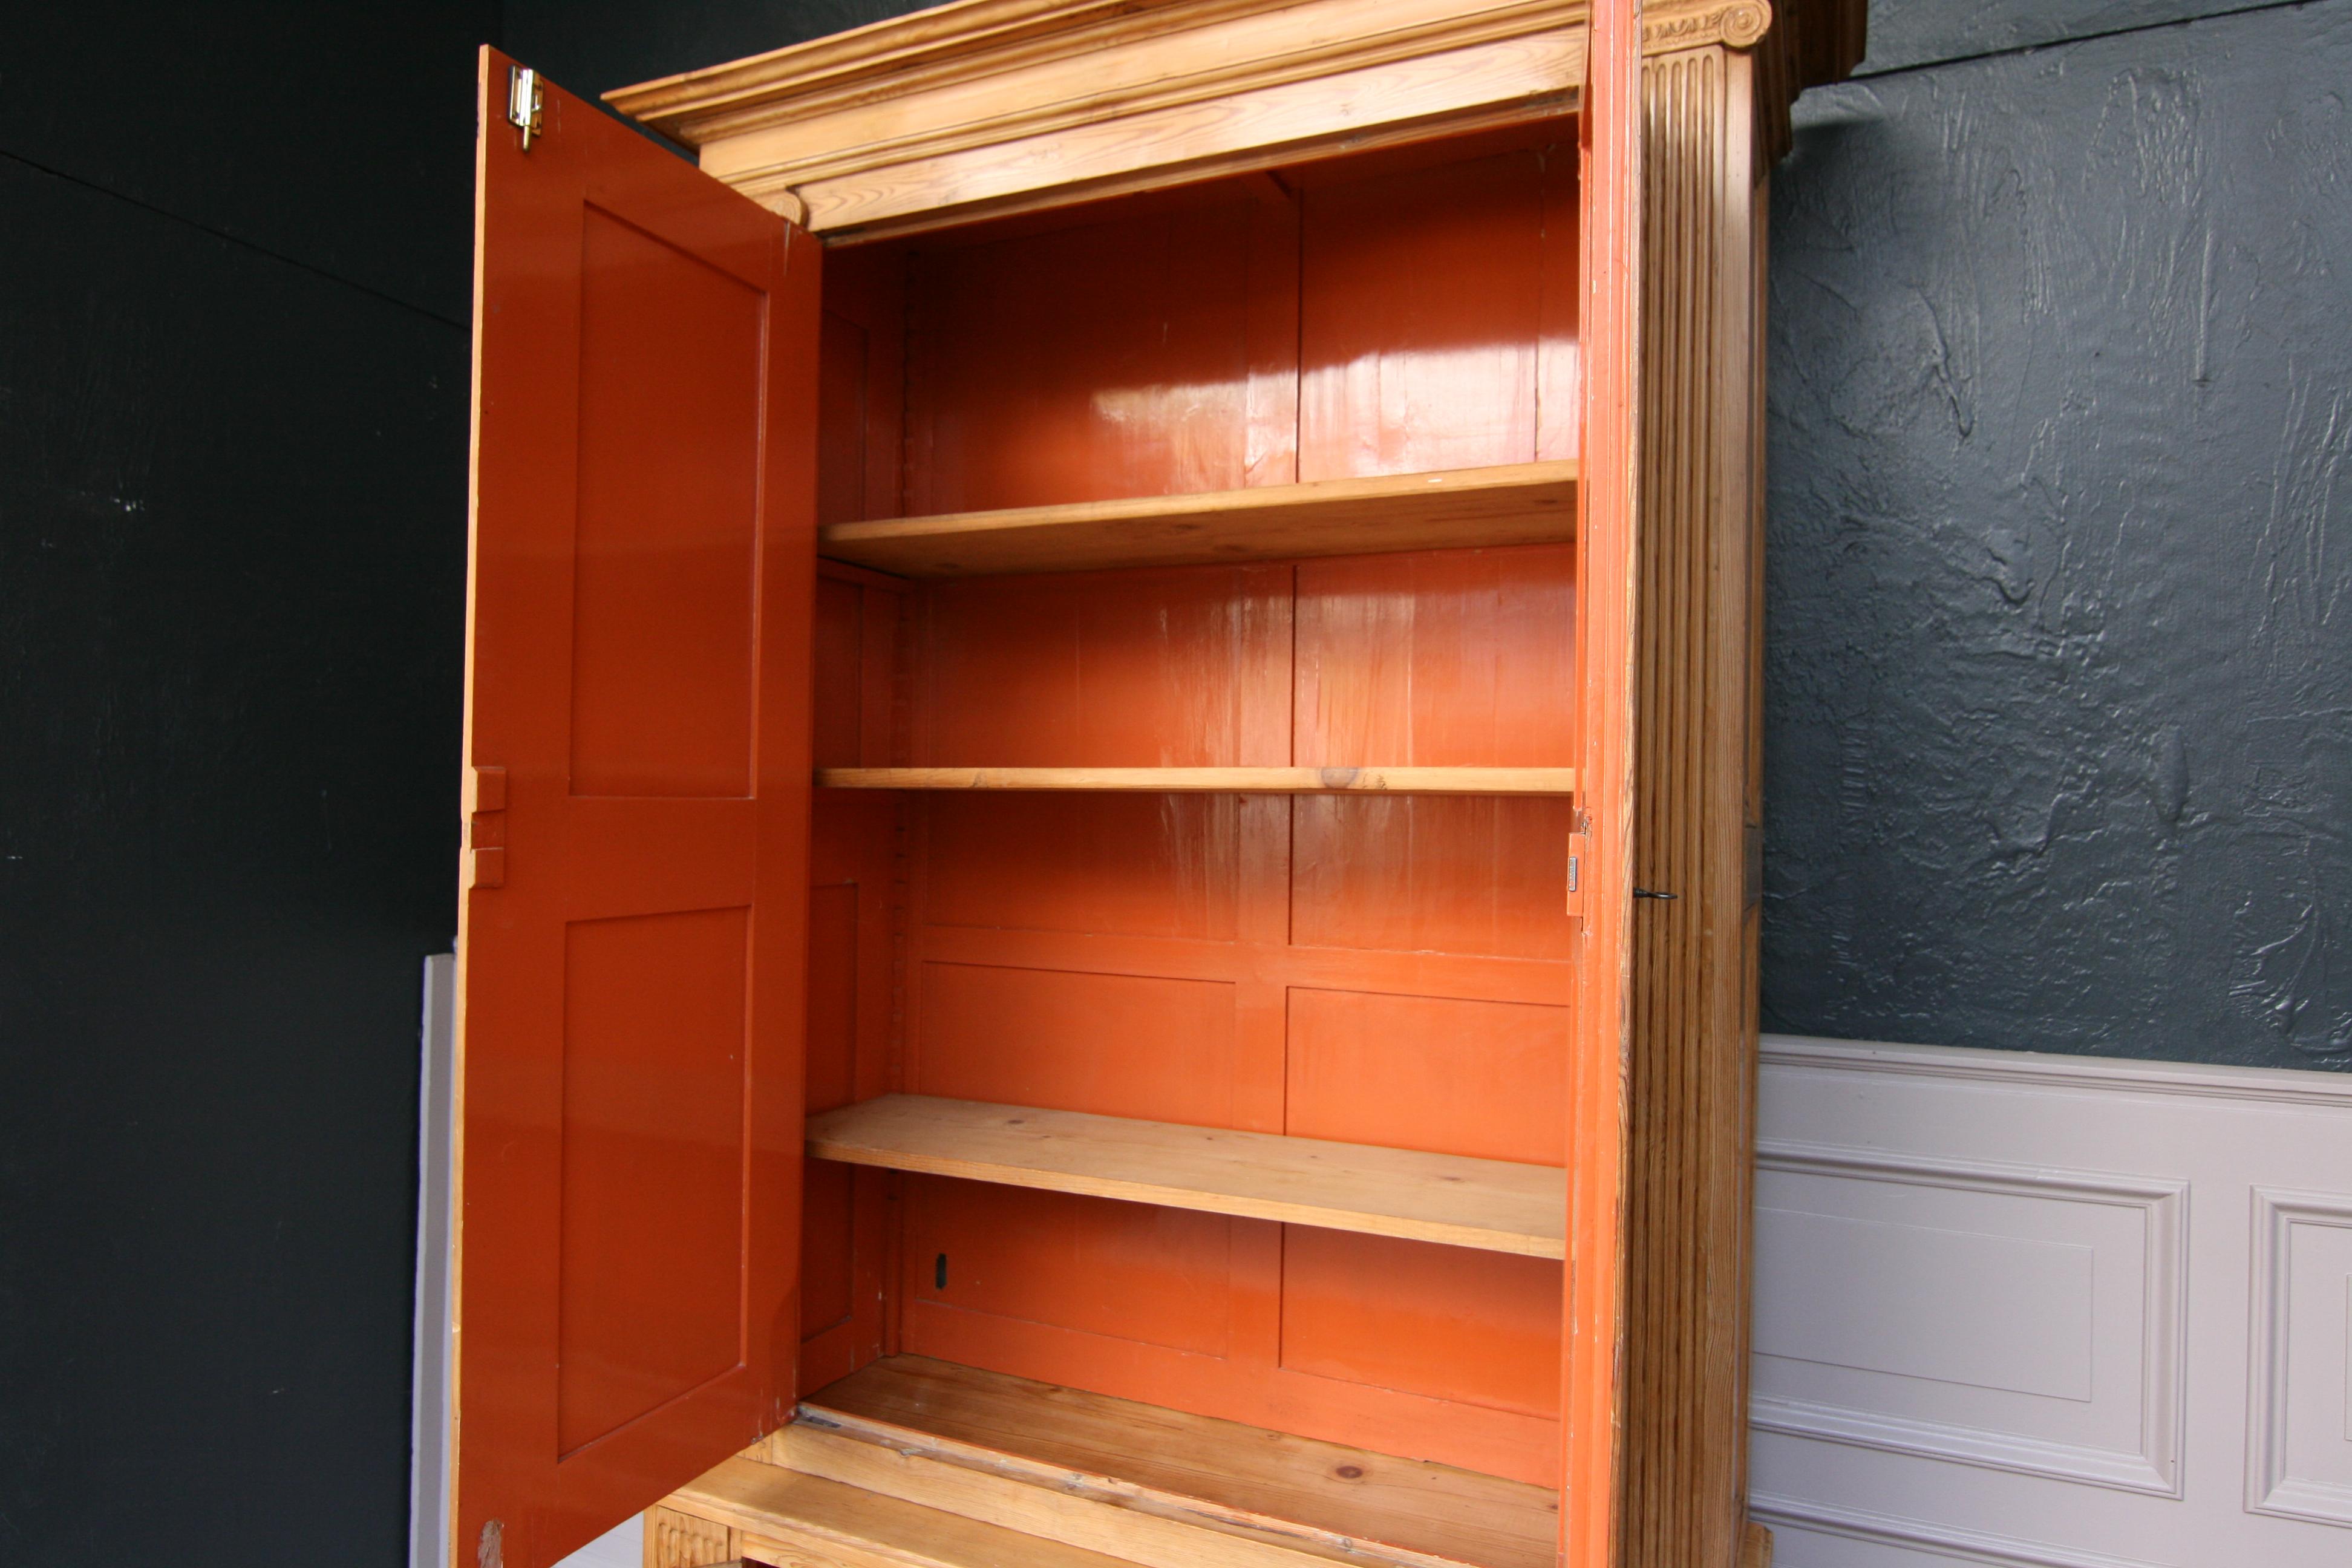 Fir 19th Century French Renaissance Revival Bookcase Cabinet Made of Pine For Sale